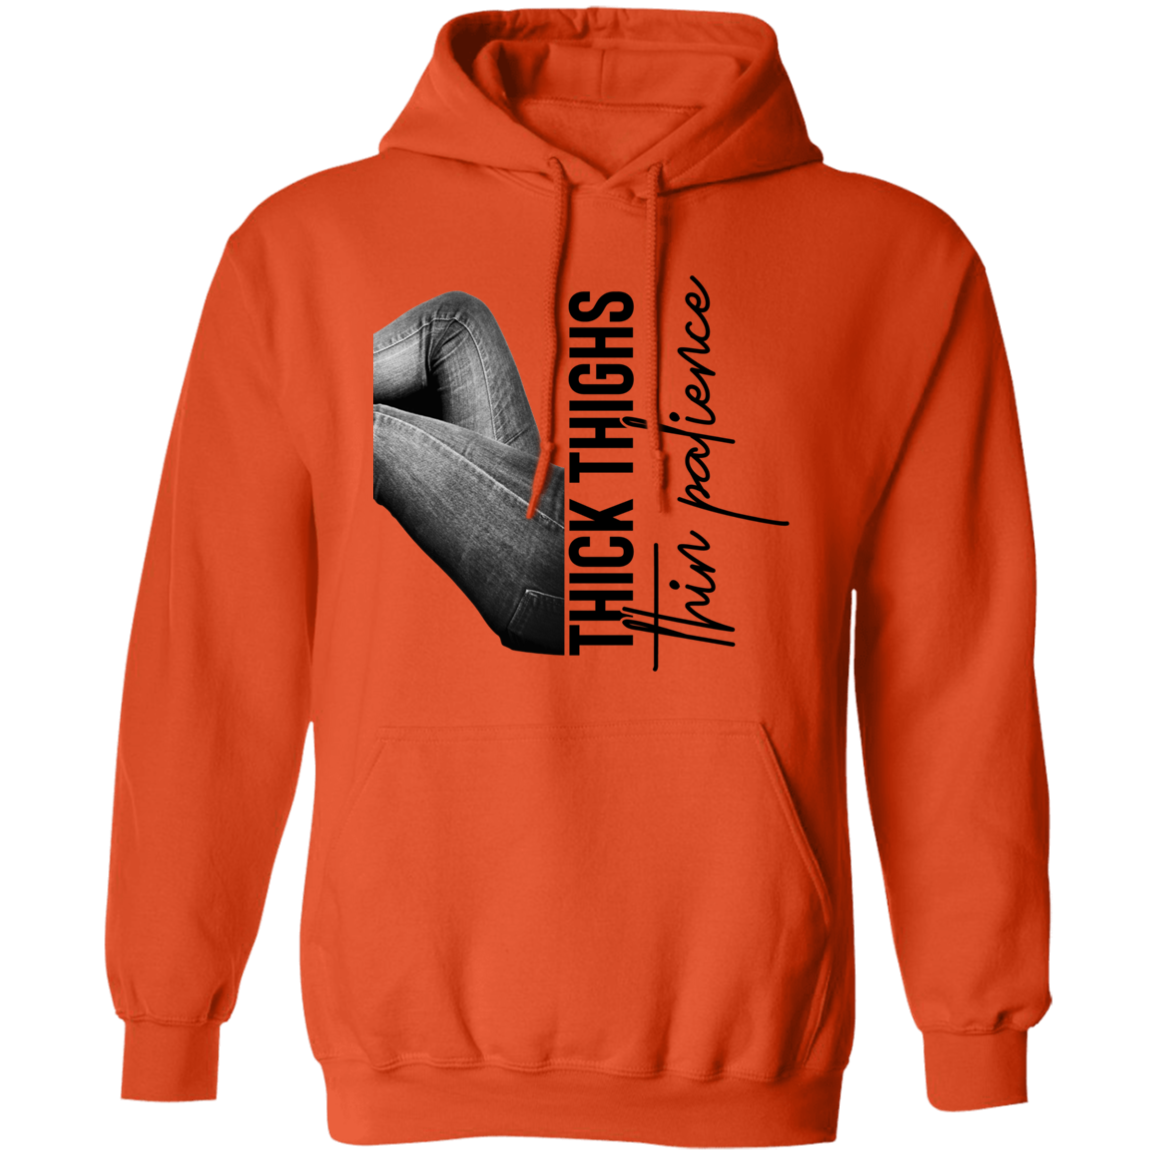 THICK THIGHS THIN PATIENCE PULLOVER HOODIE